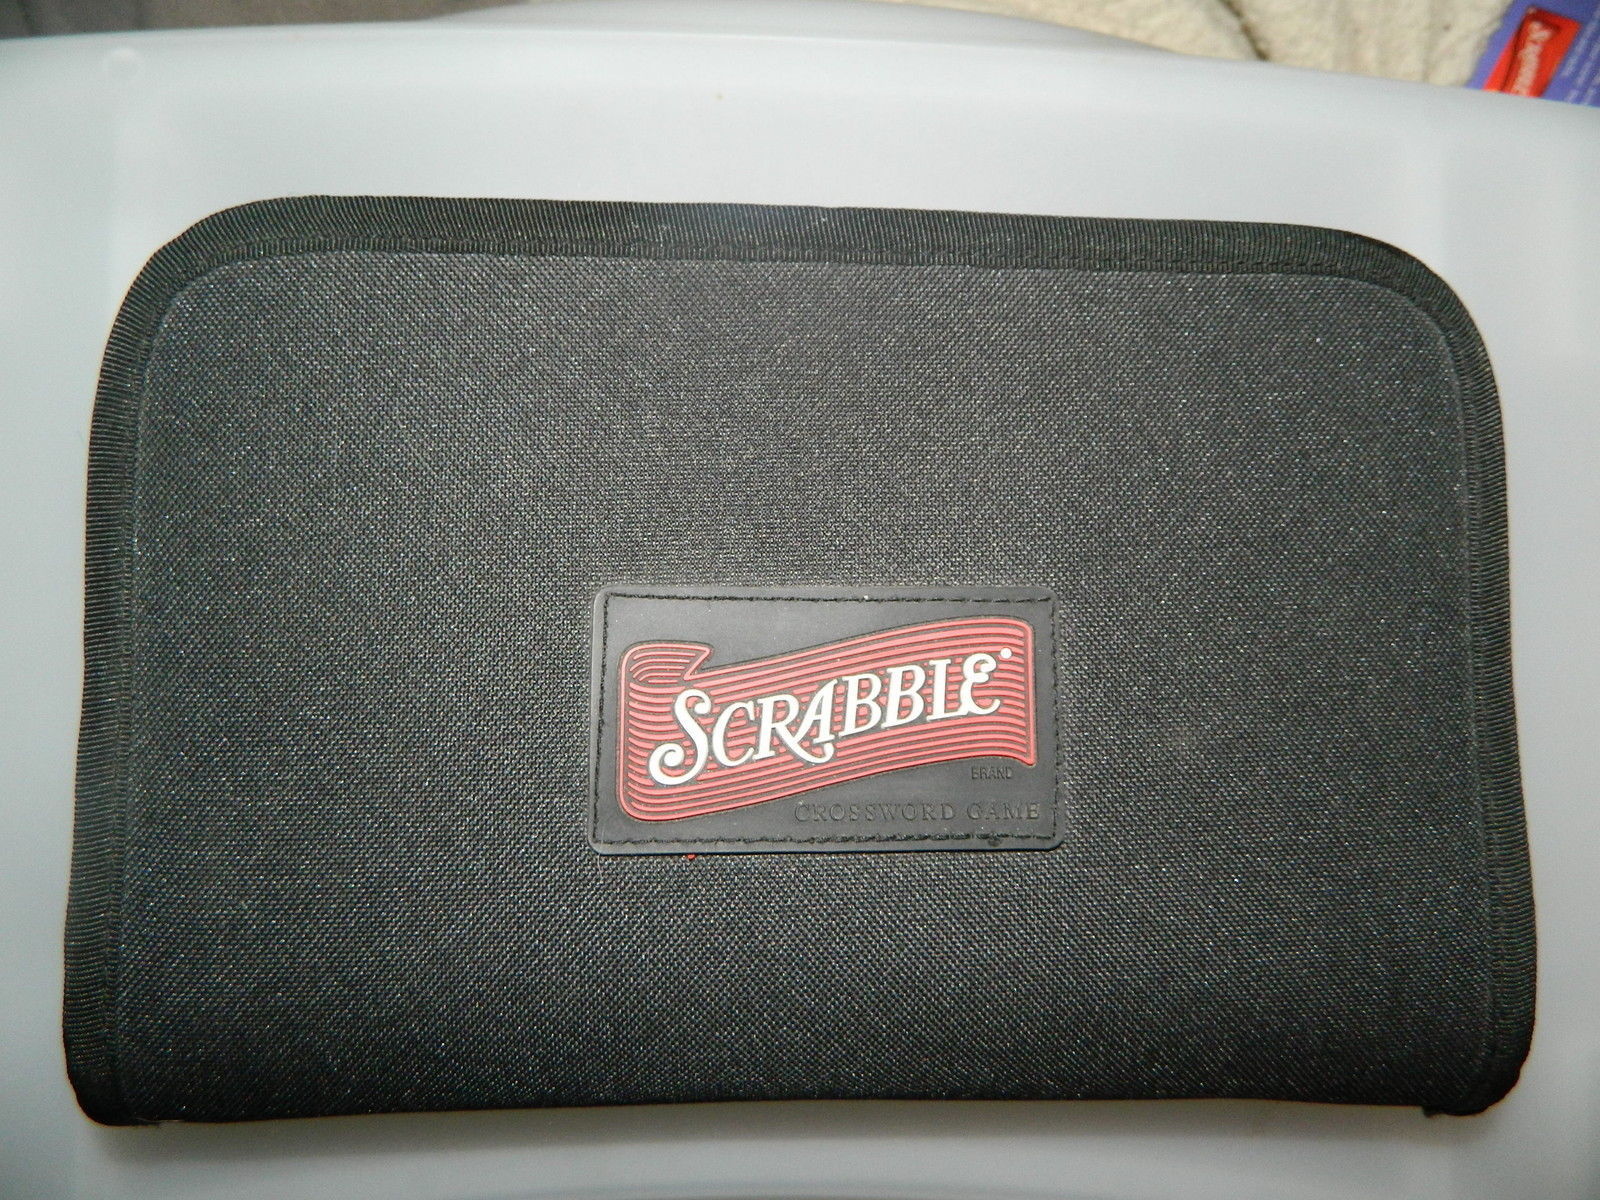 Primary image for Scrabble Travel Board Game in Black Zippered Case-Complete